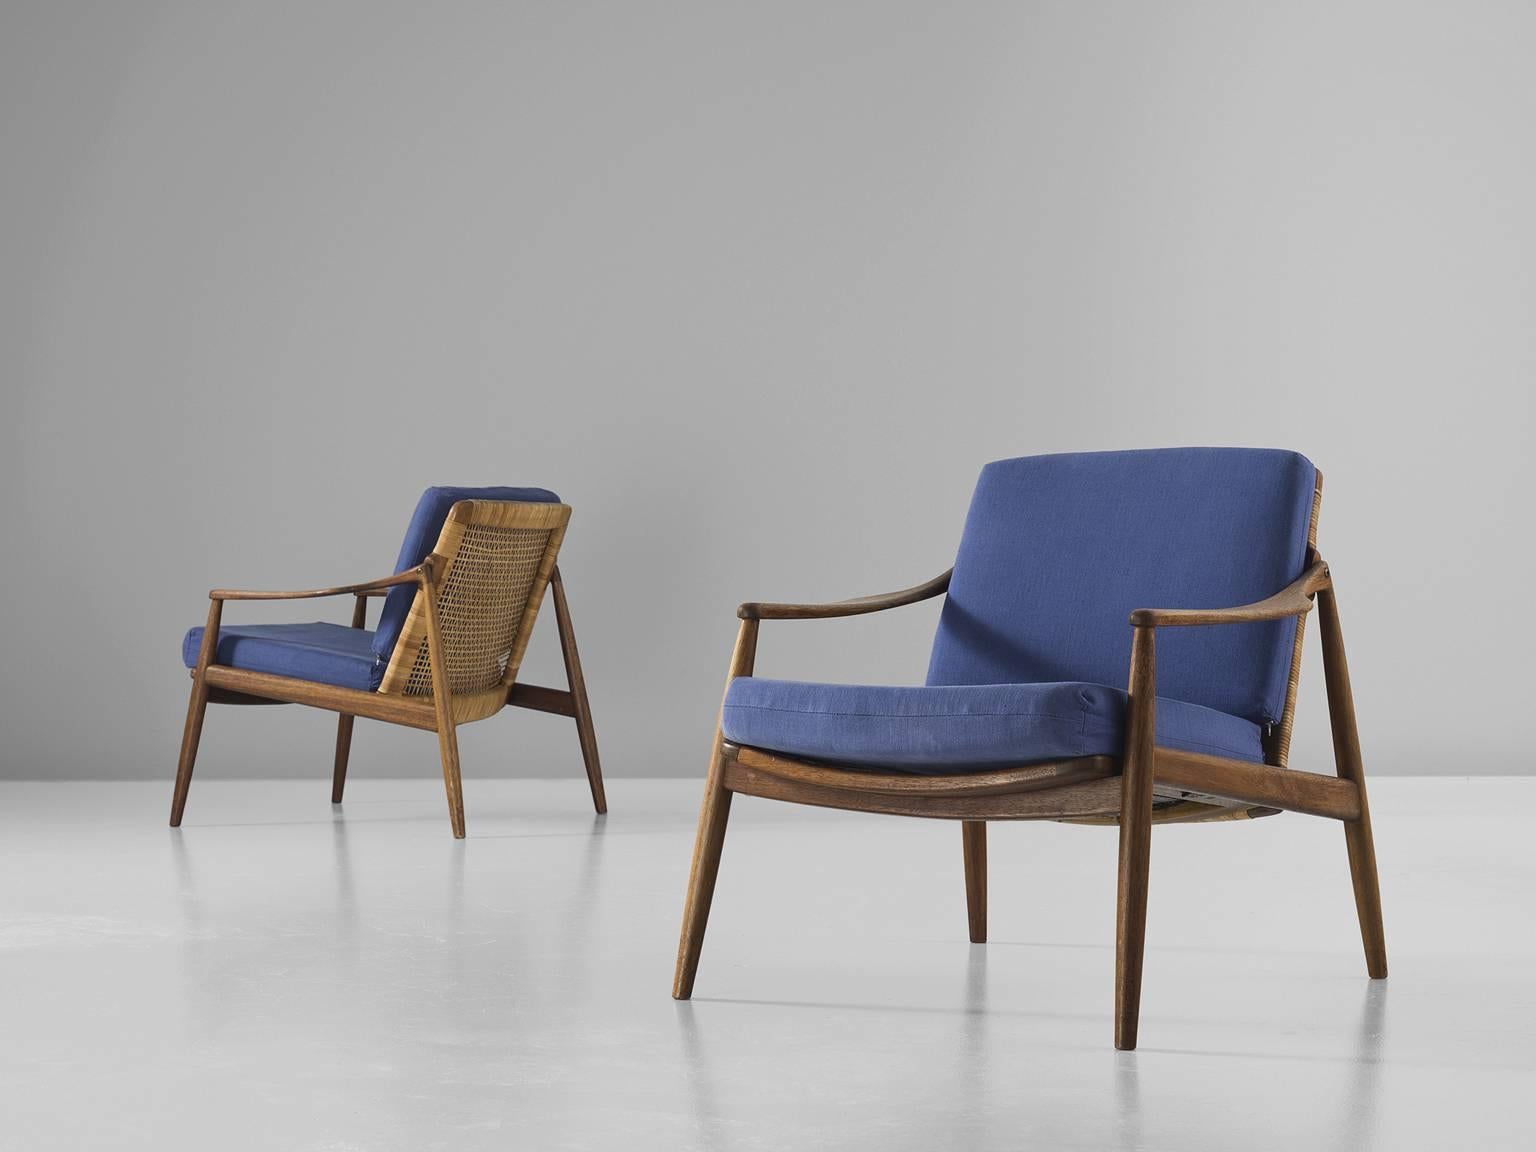 Hartmut Lohmeyer for Wilkhahn, armchairs, blue fabric, teak and rattan, Germany, 1956.

The lounge low armchairs are sensuous and organically shaped. They feature a slightly tilted back and are detailed with tapered legs. The softly bent armrests